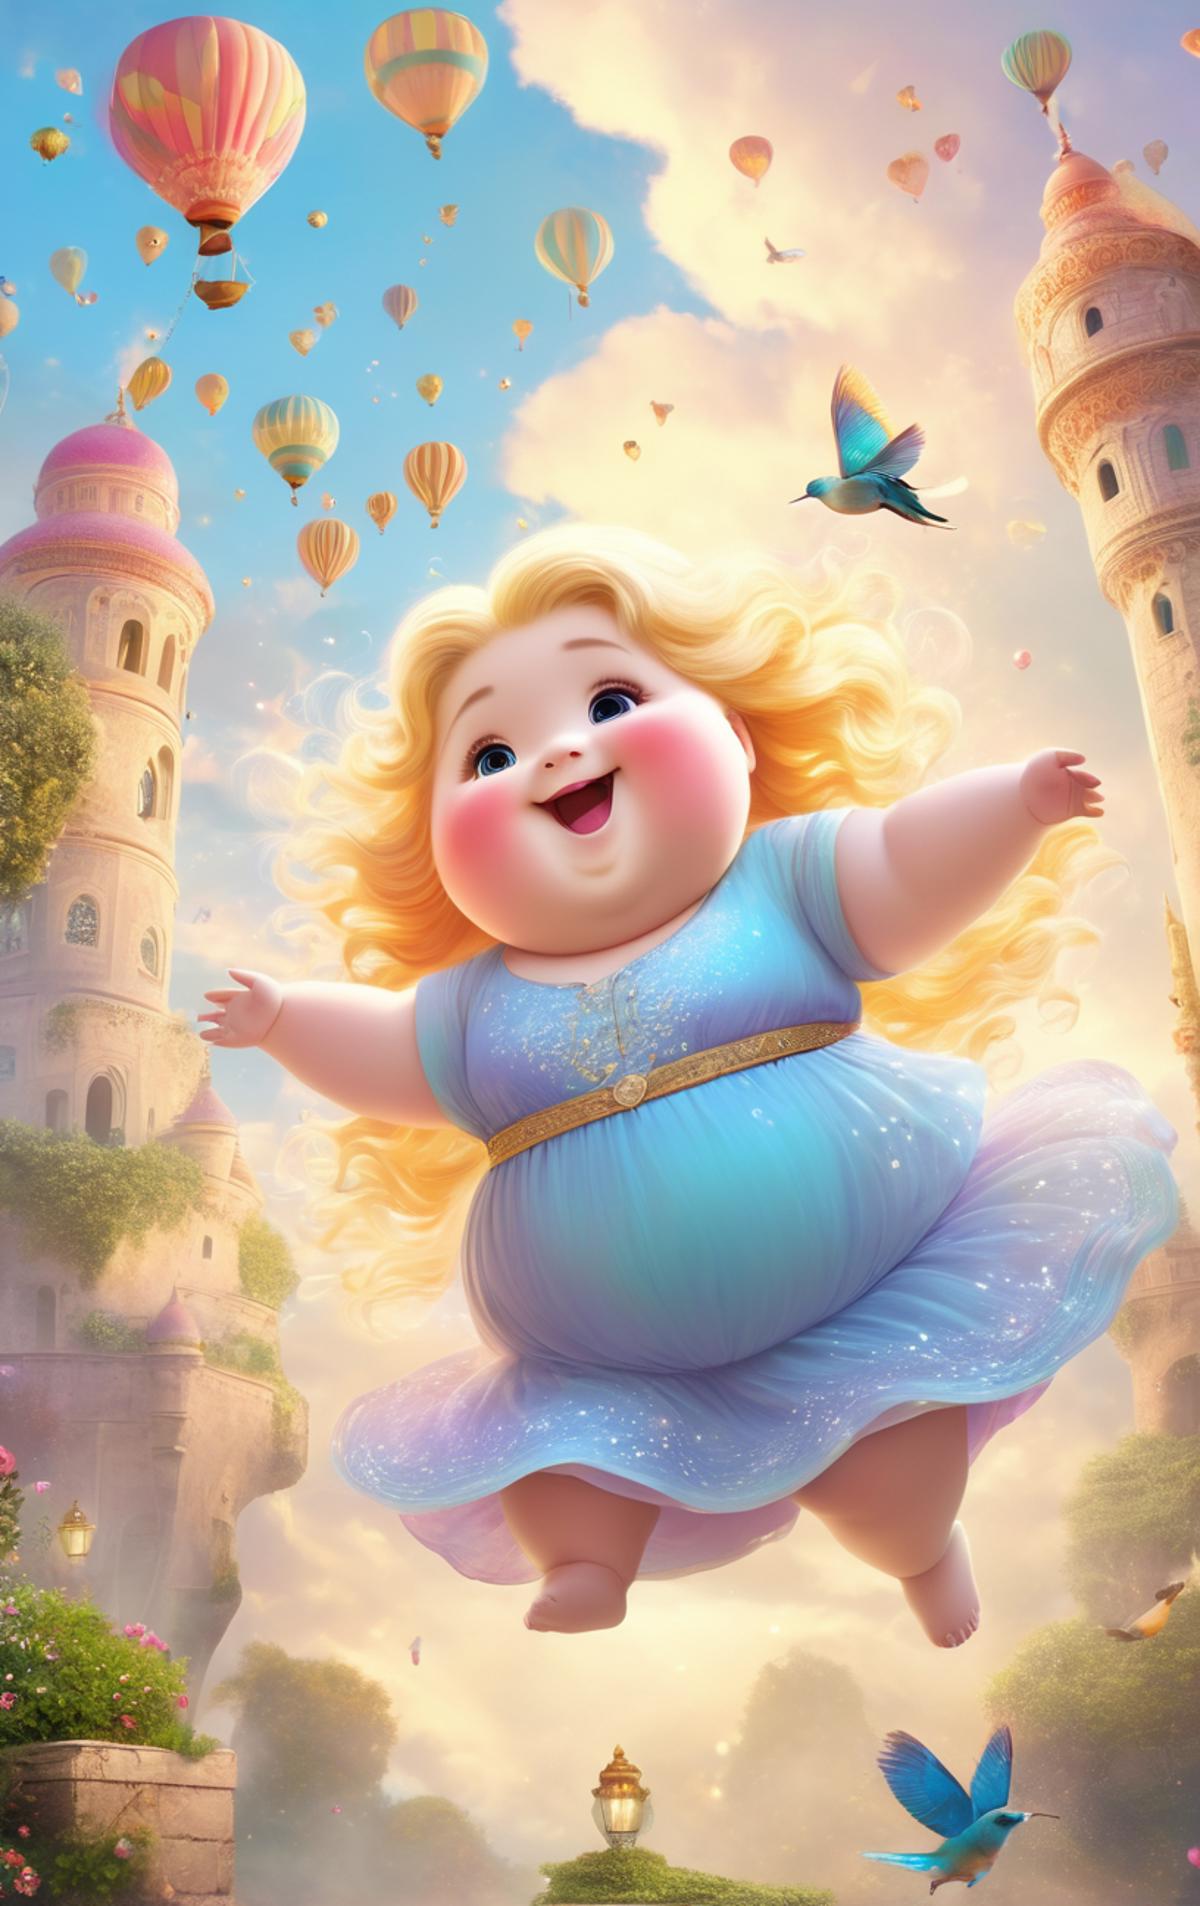 A Fat Baby Girl in a Blue Dress Flying with Balloons and a Blue Bird.